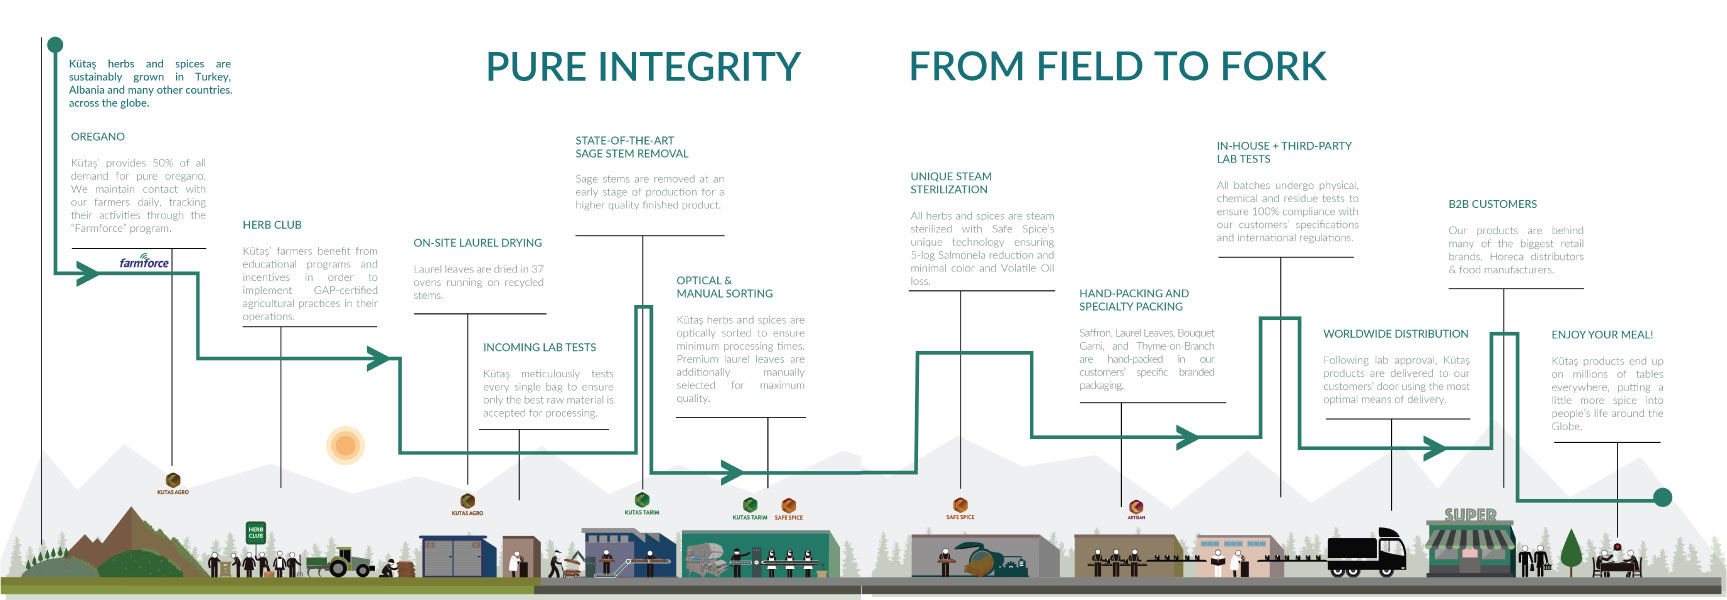 from field to fork infographic